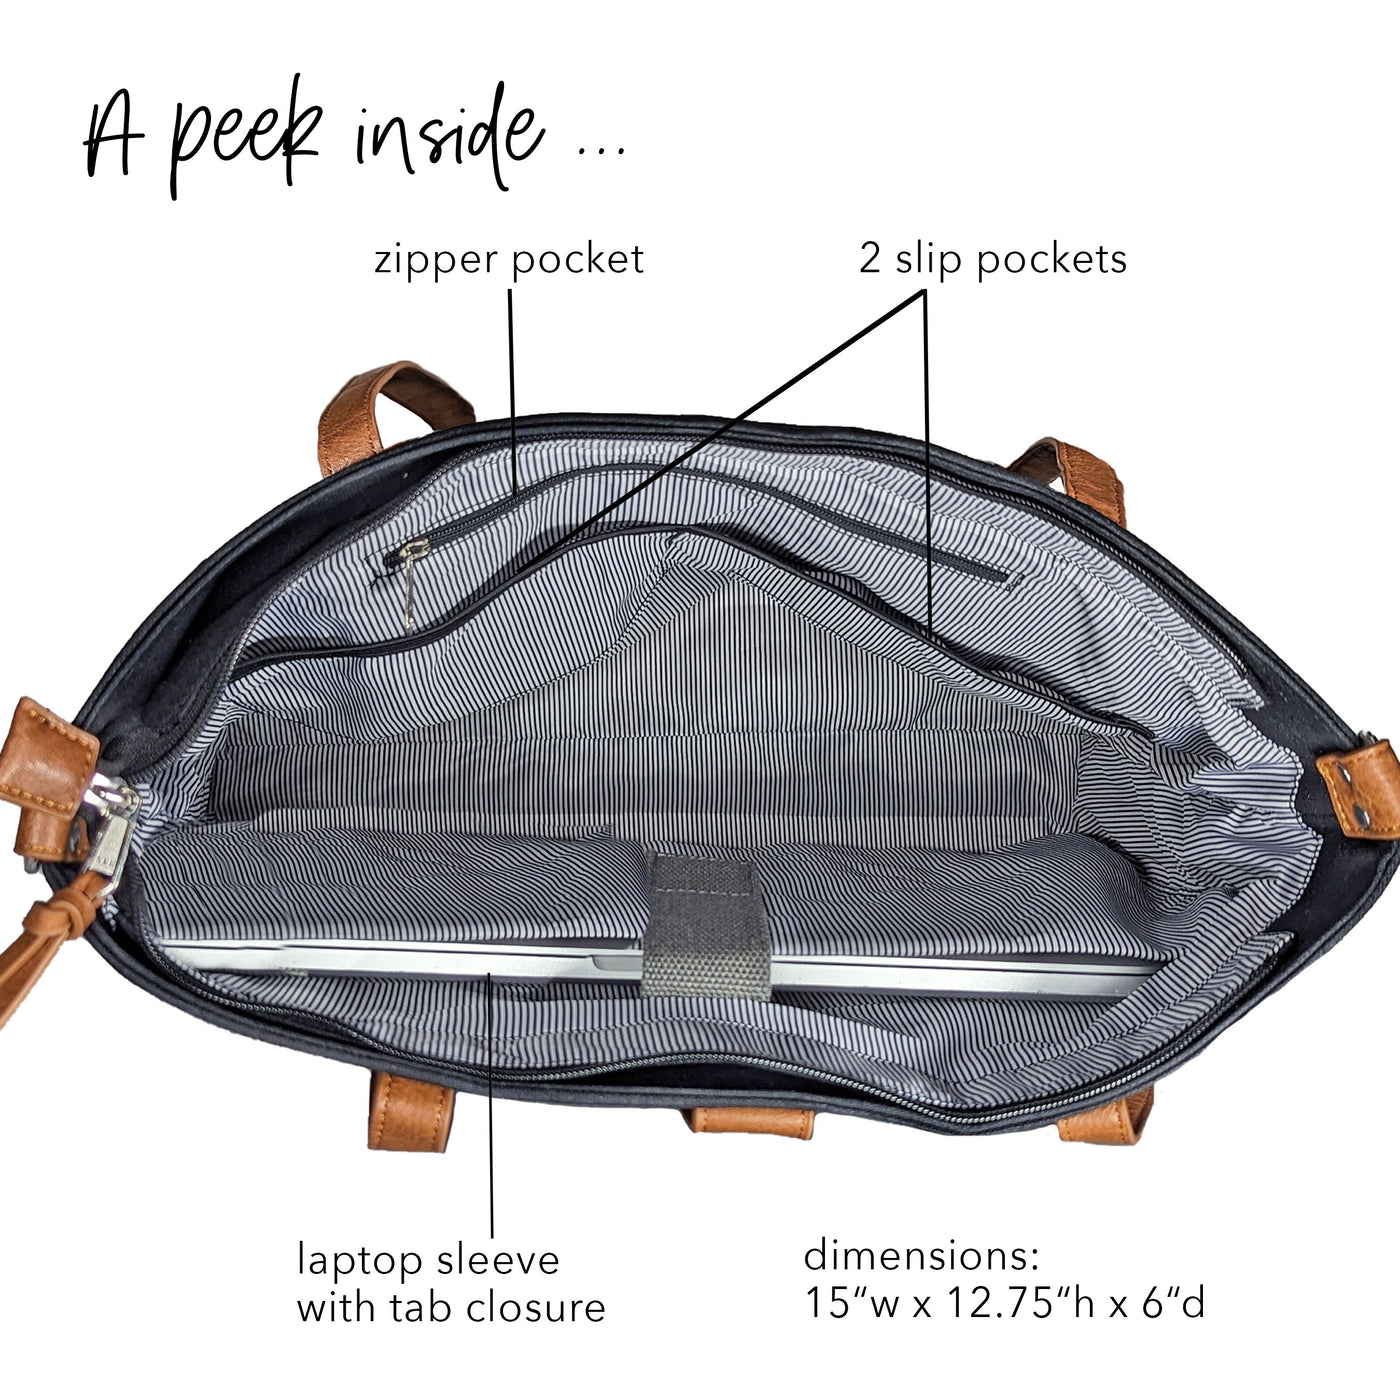 Top-down view of the CarryAll Tote interior, showing laptop sleeve, 2 slip pockets and 1 zipper pocket, all fully-lined with a thin B&W stripe pattern.